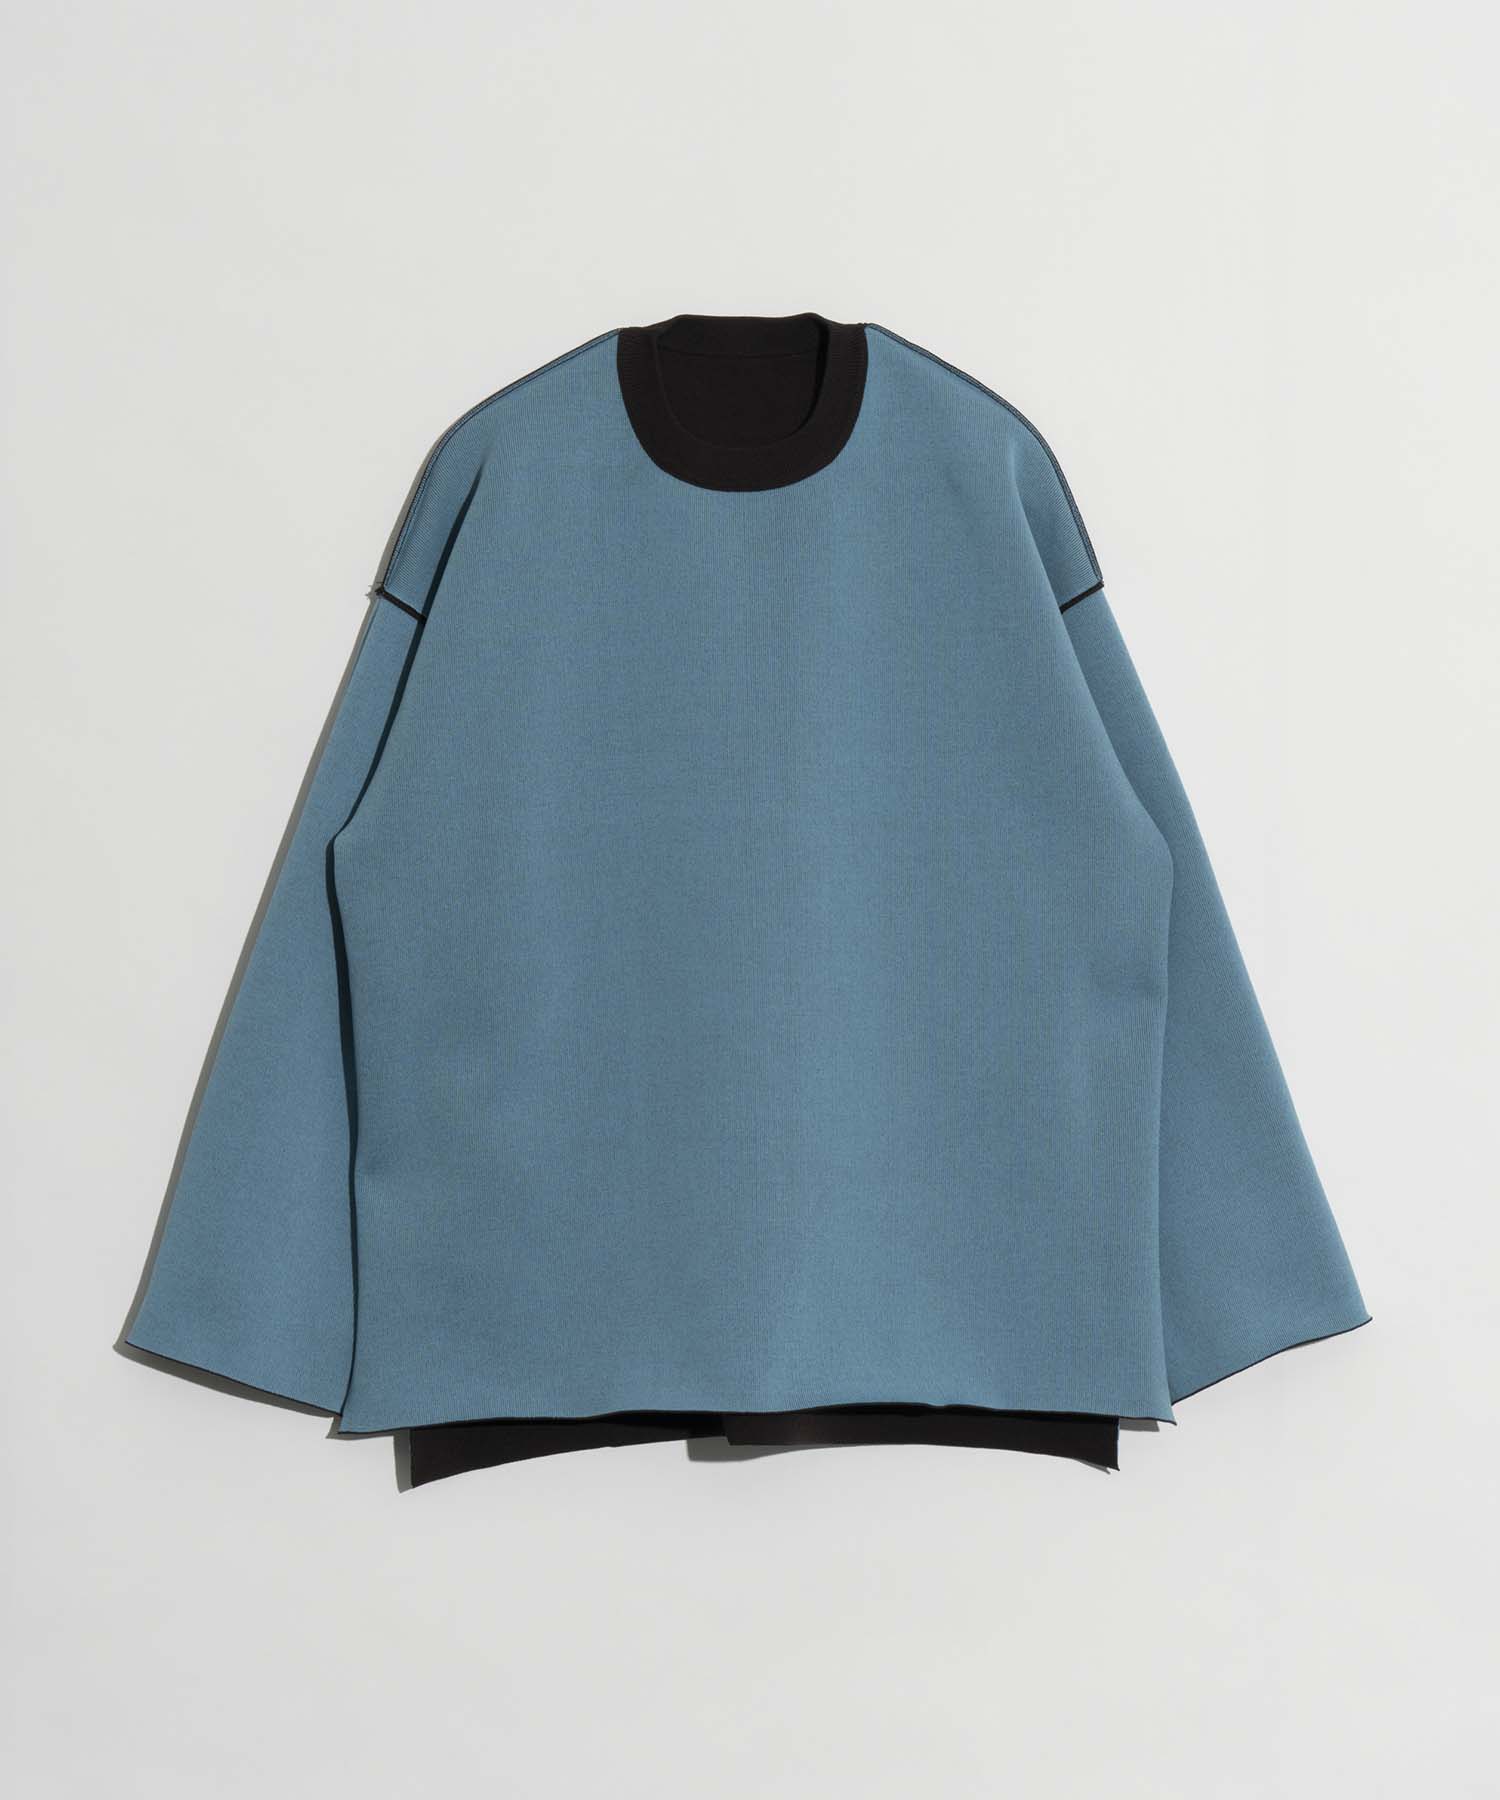 [SALE] DOUBLE-FACE KNIT PRIME-OVER REVERSIBLE CREW NECK PULLOVER